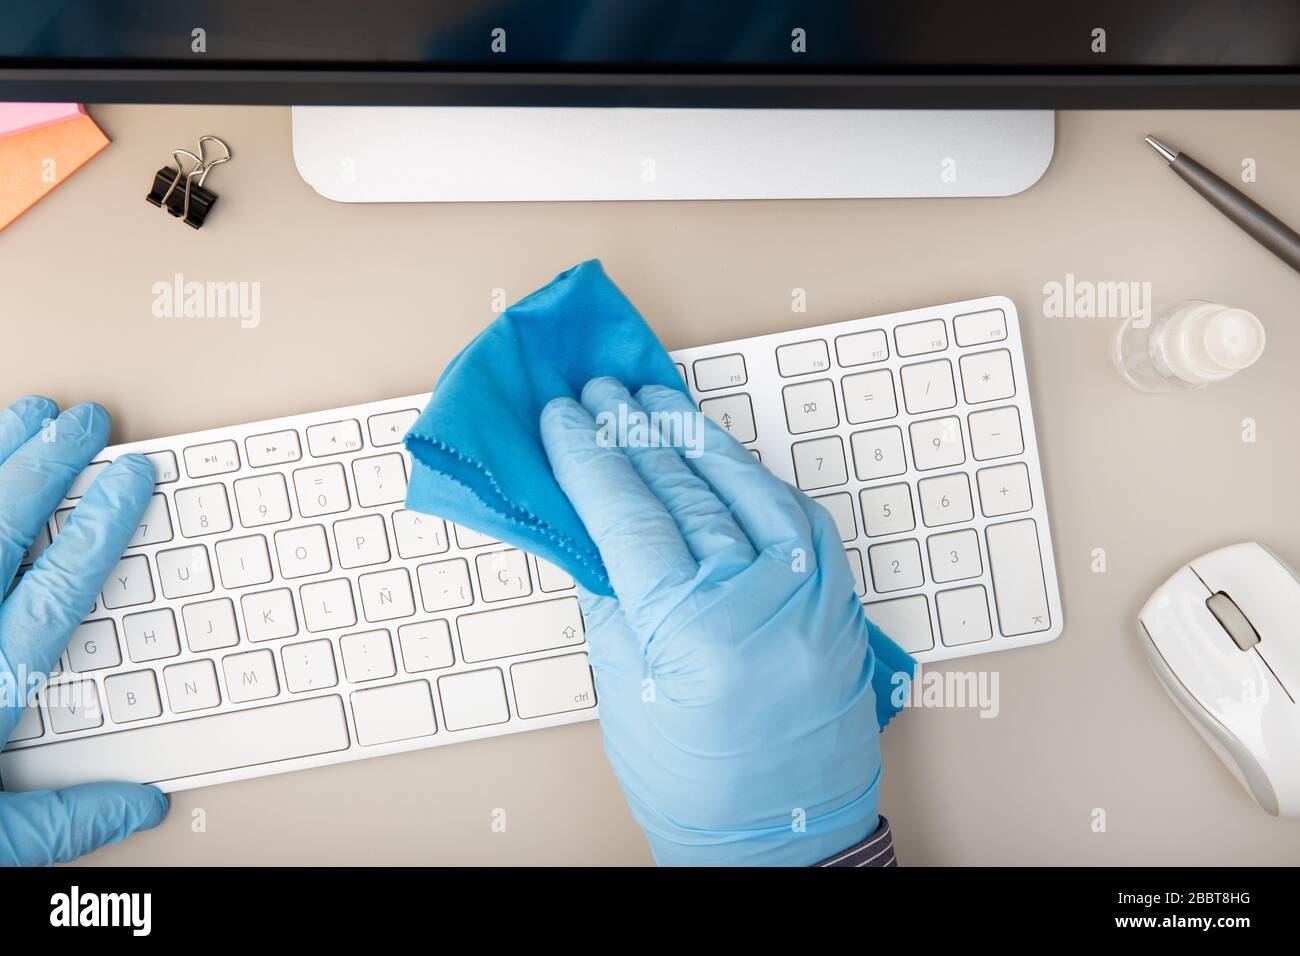 Hand with protective glove cleaning a keyboard with disinfectant. COVID-19 Coronavirus outbreak prevention concept. Top view Stock Photo